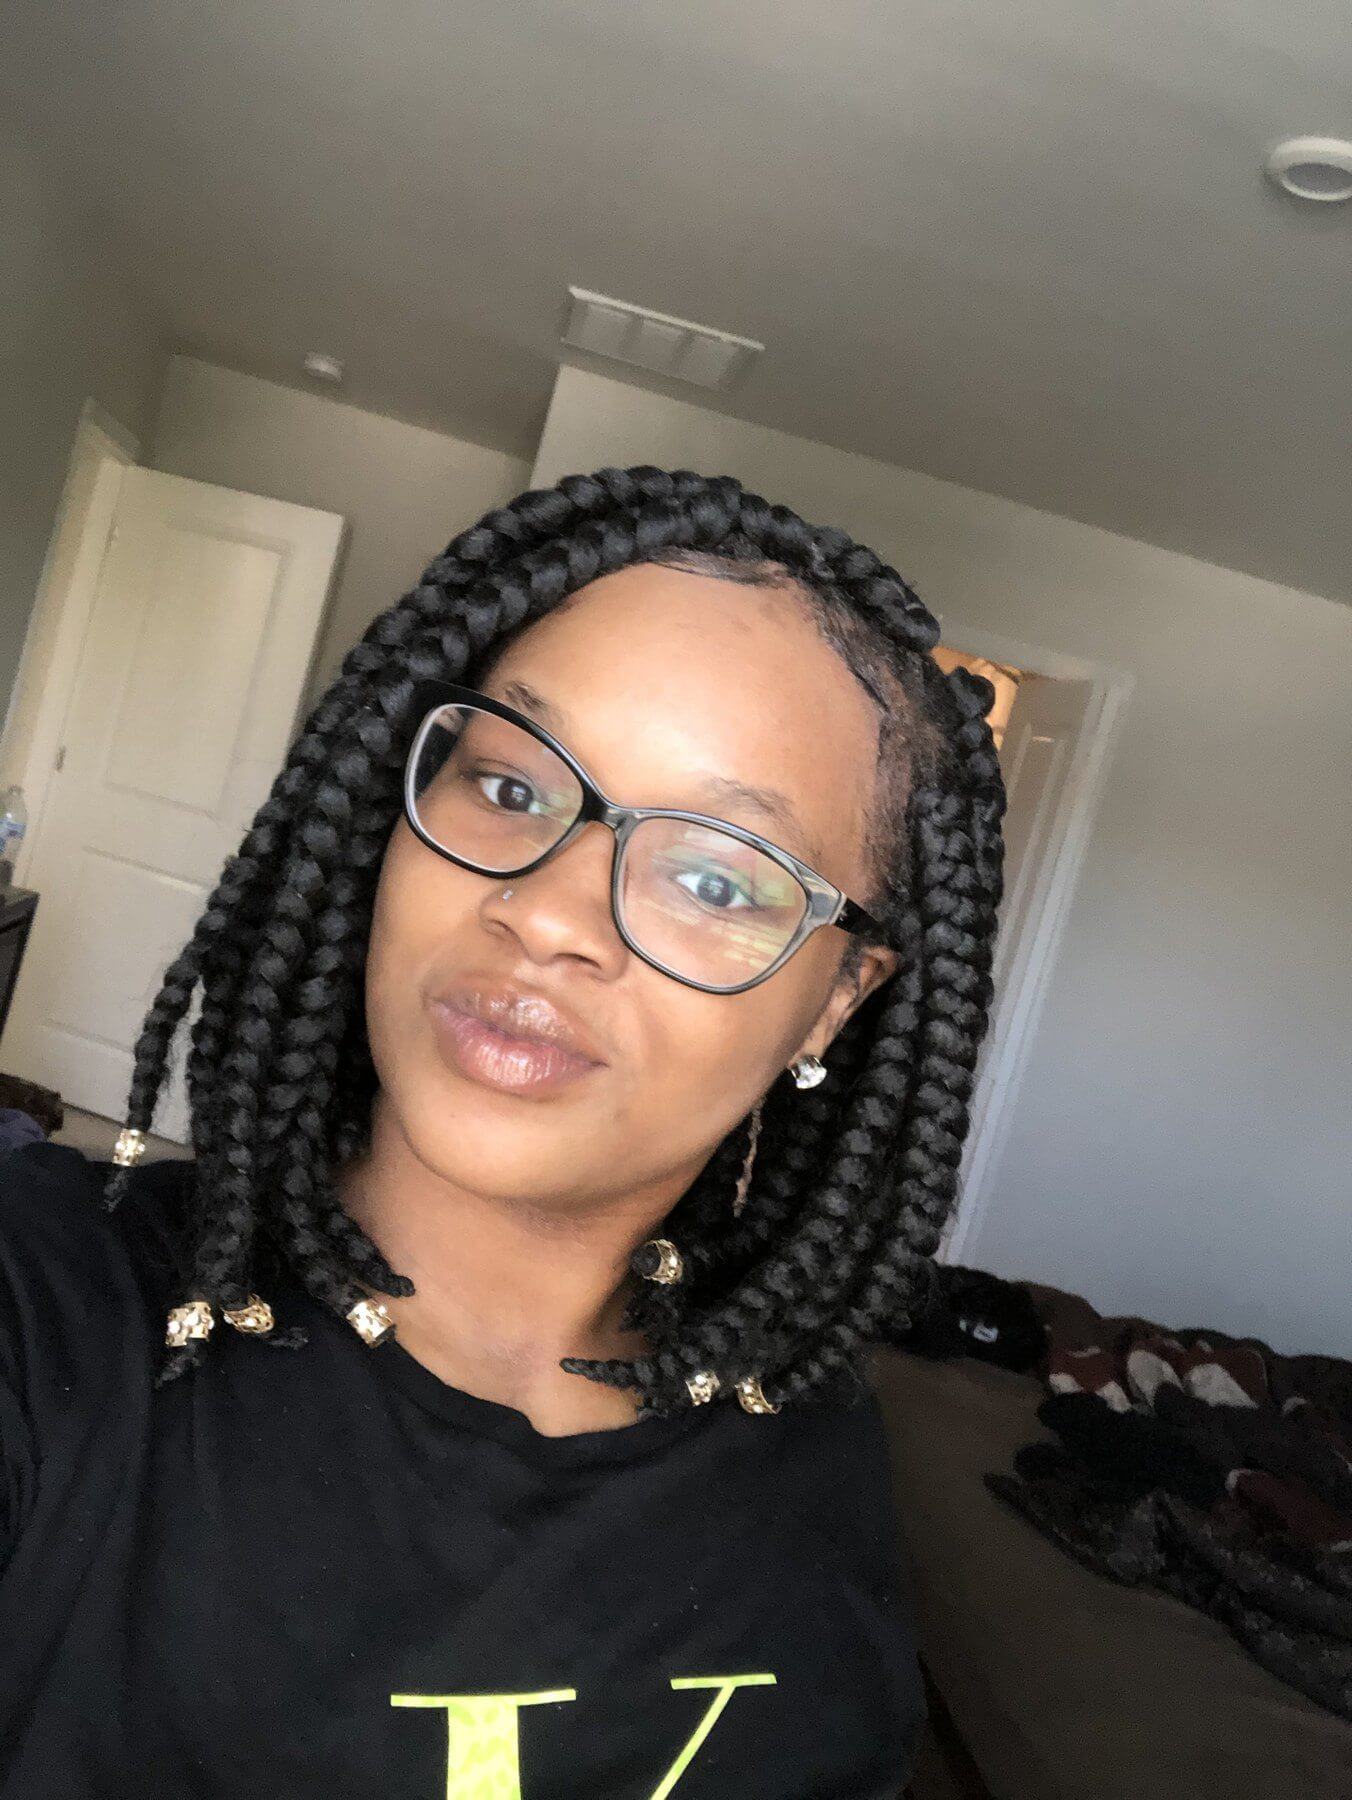 Autumn Shelton of Honeyed Lips and Skincare — a black woman-owned business